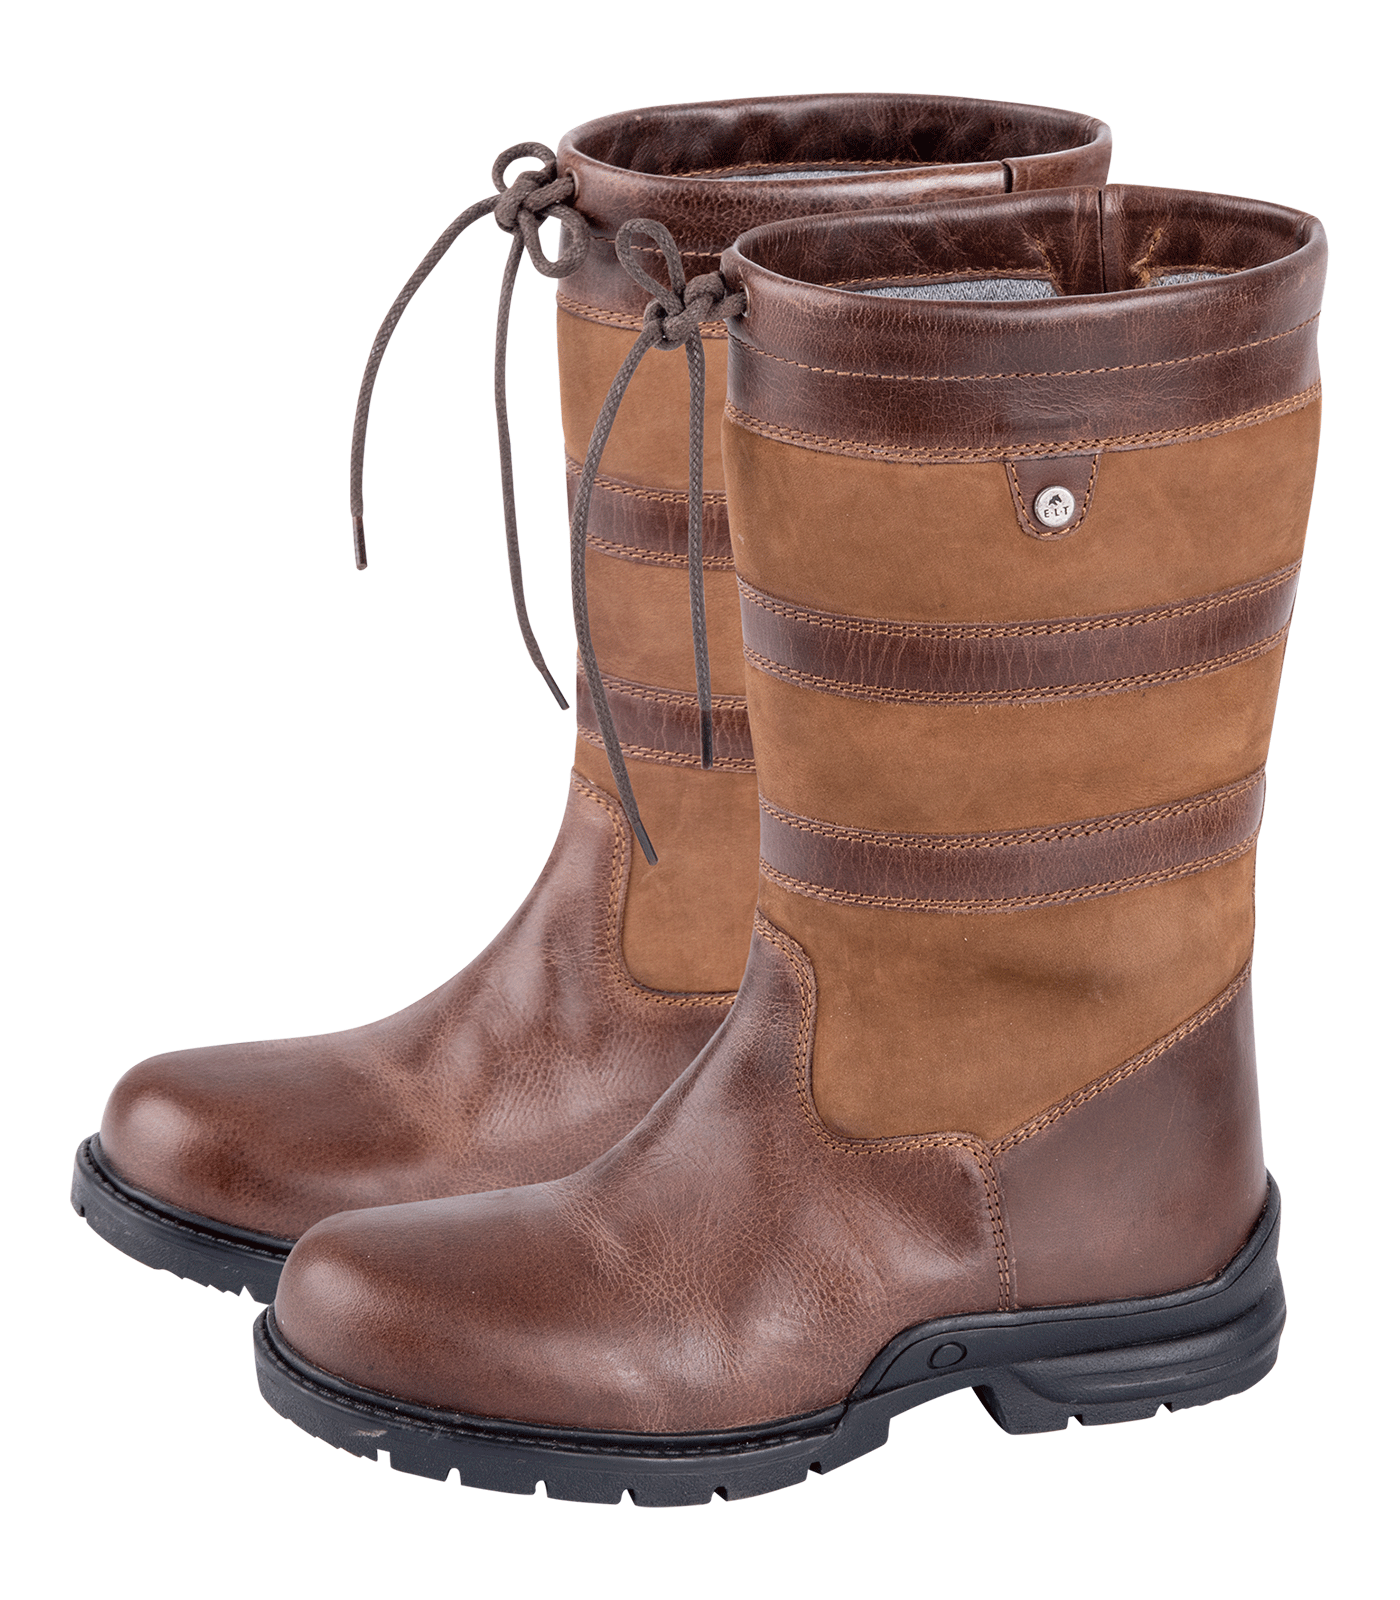 6188607-36_10-bottes-ecurie-hiver-doublees-york